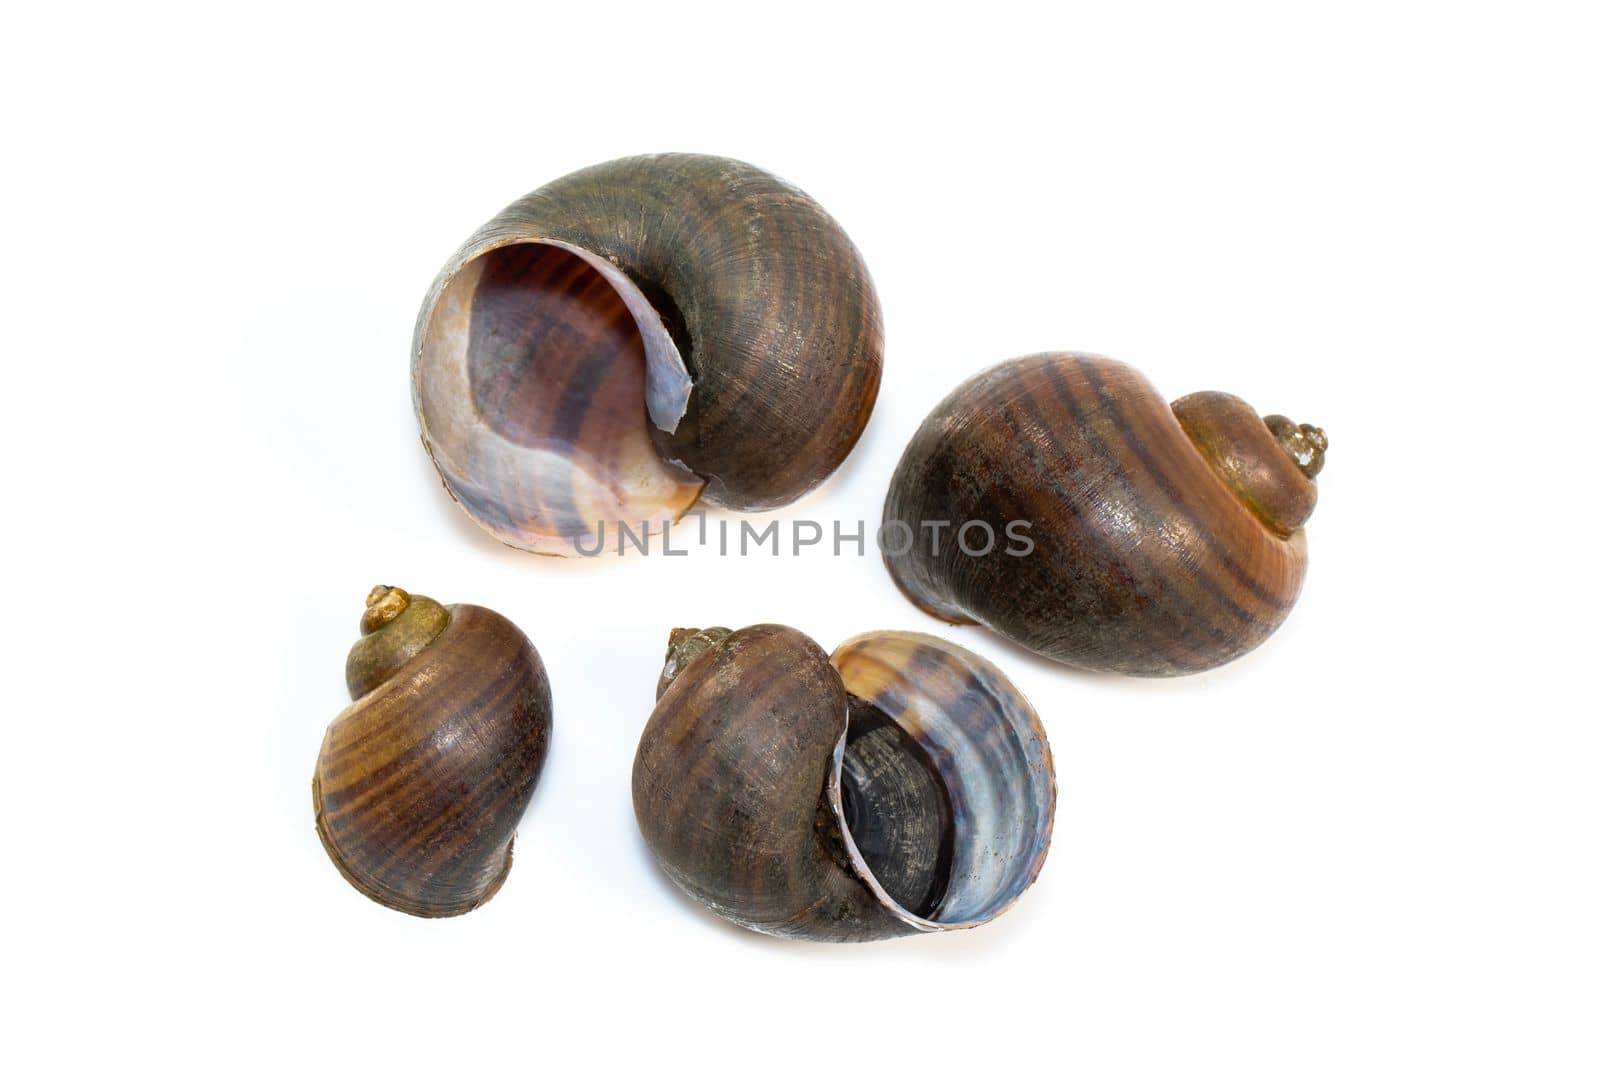 Group of apple snail (Pila ampullacea) isolated on white background. Animal.